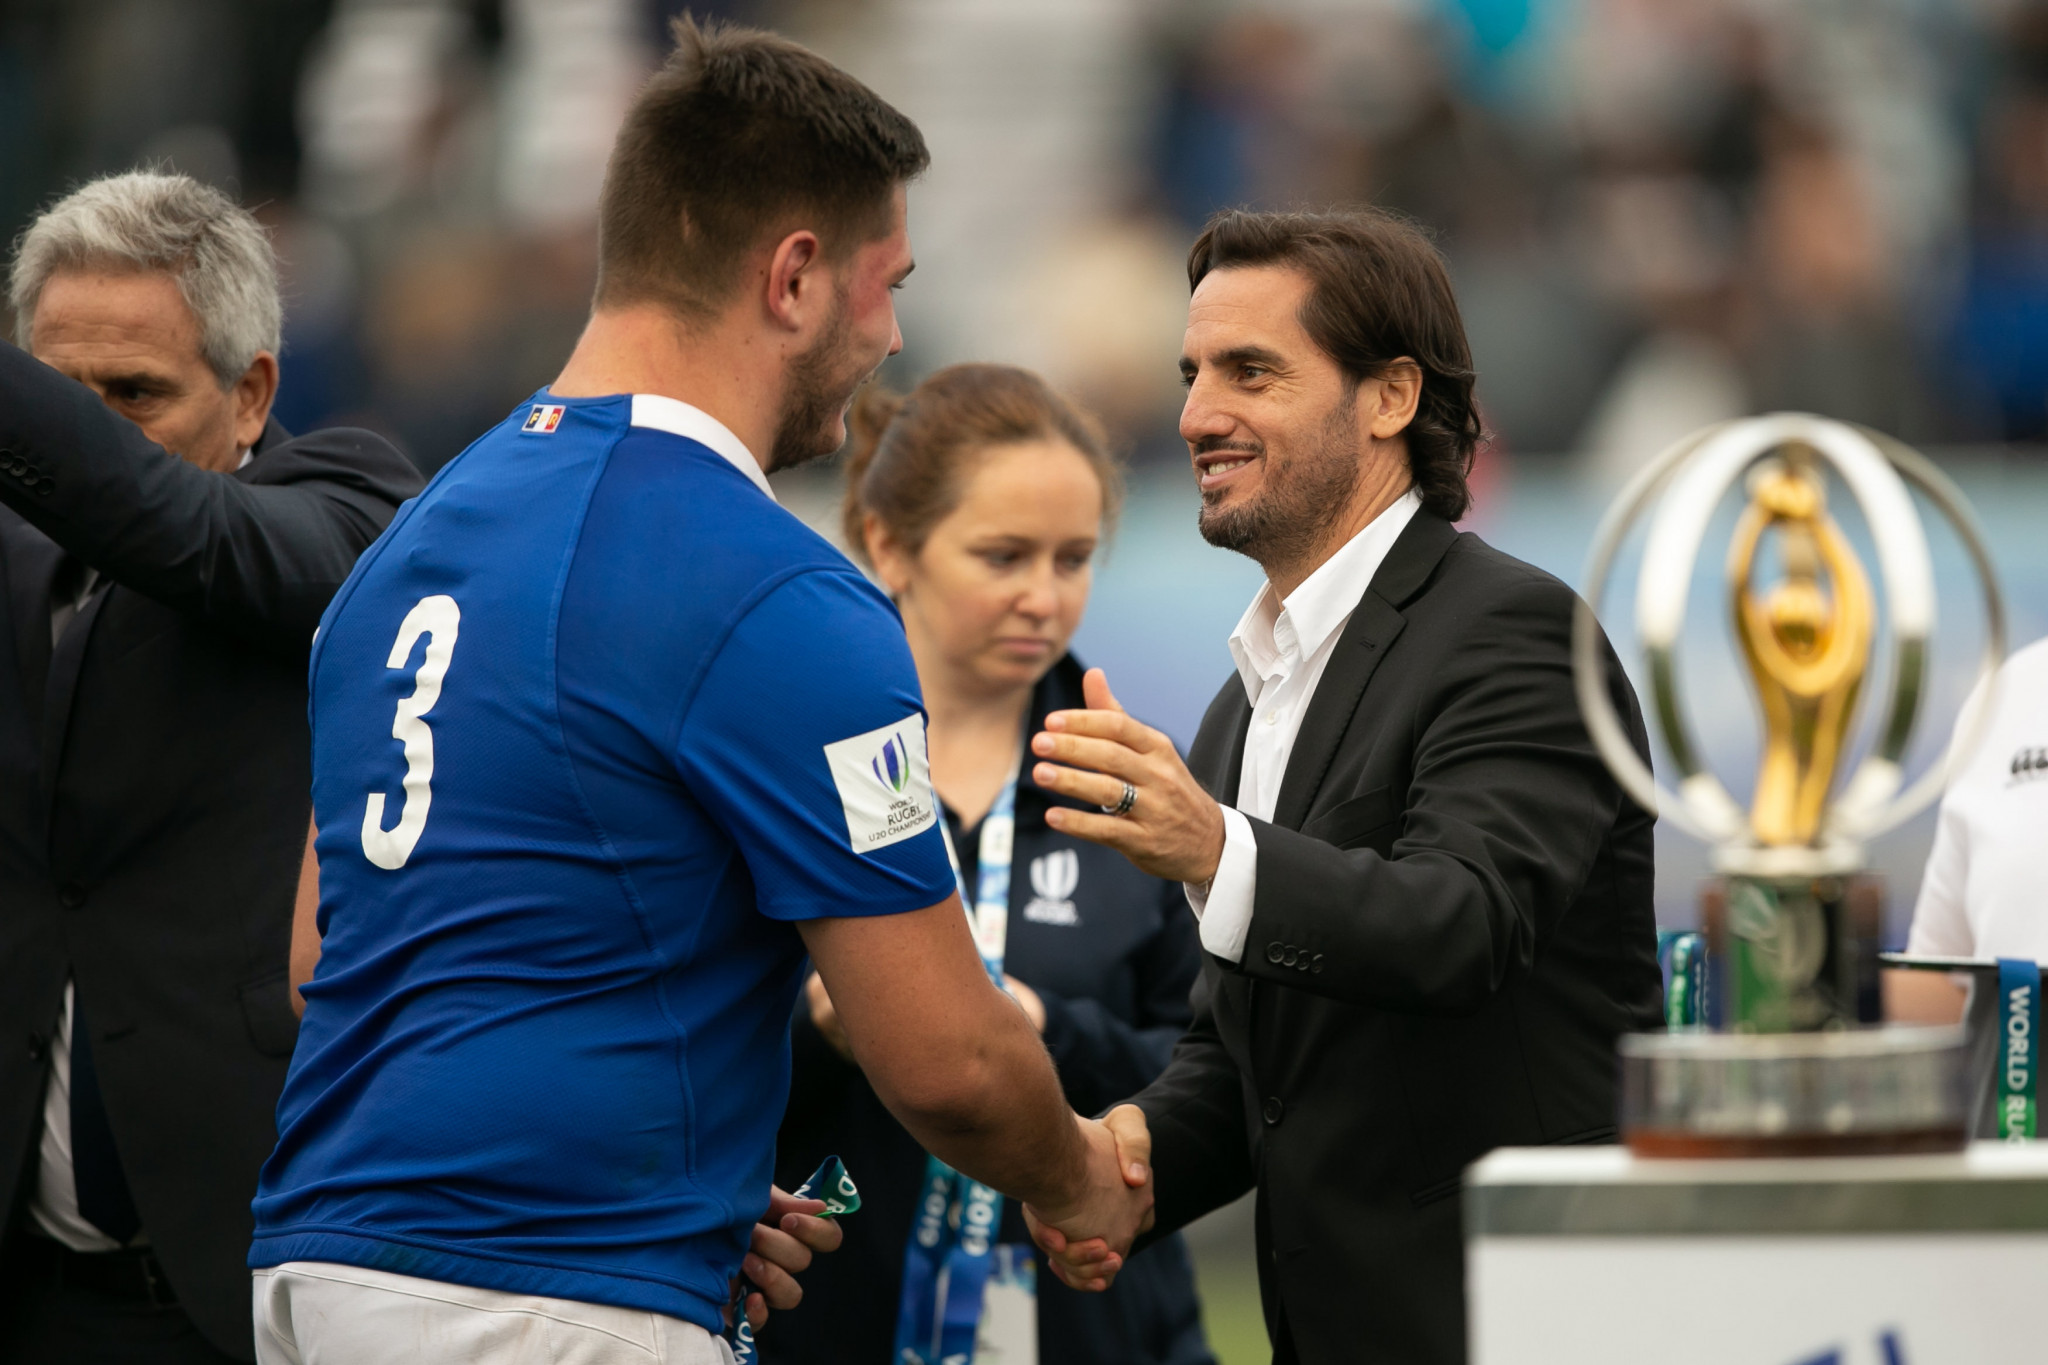 Agustín Pichot, right, had questioned the voting system, which gives Tier 1 nations three votes but others, such as Fiji and Georgia, only one ©Getty Images